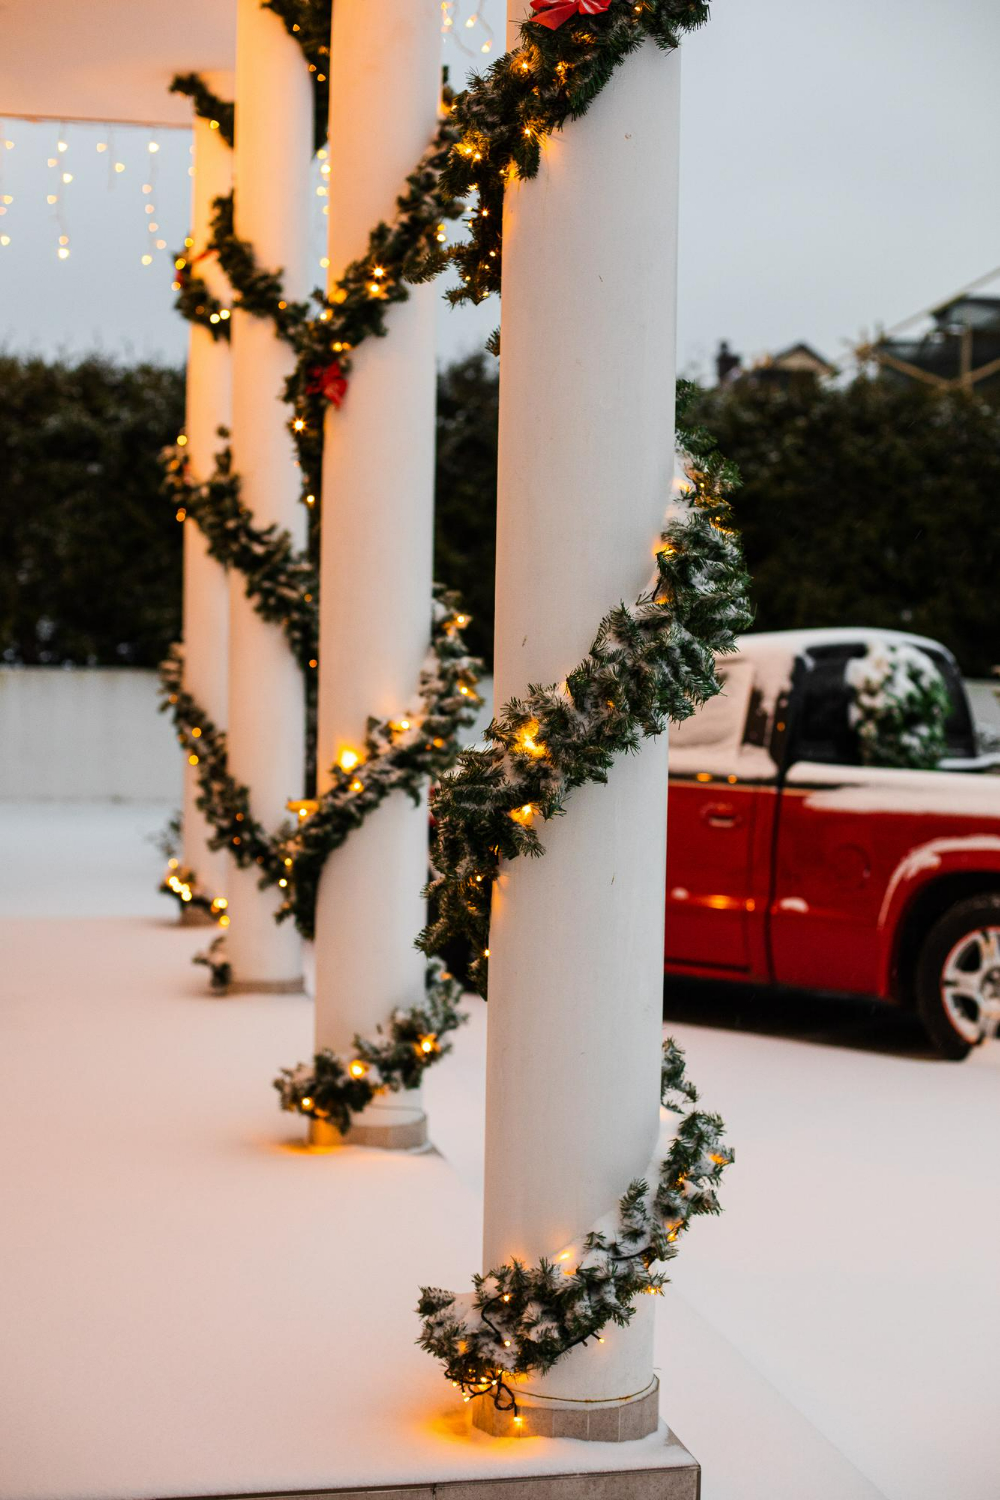 house-decorated-christmas-with-red-car